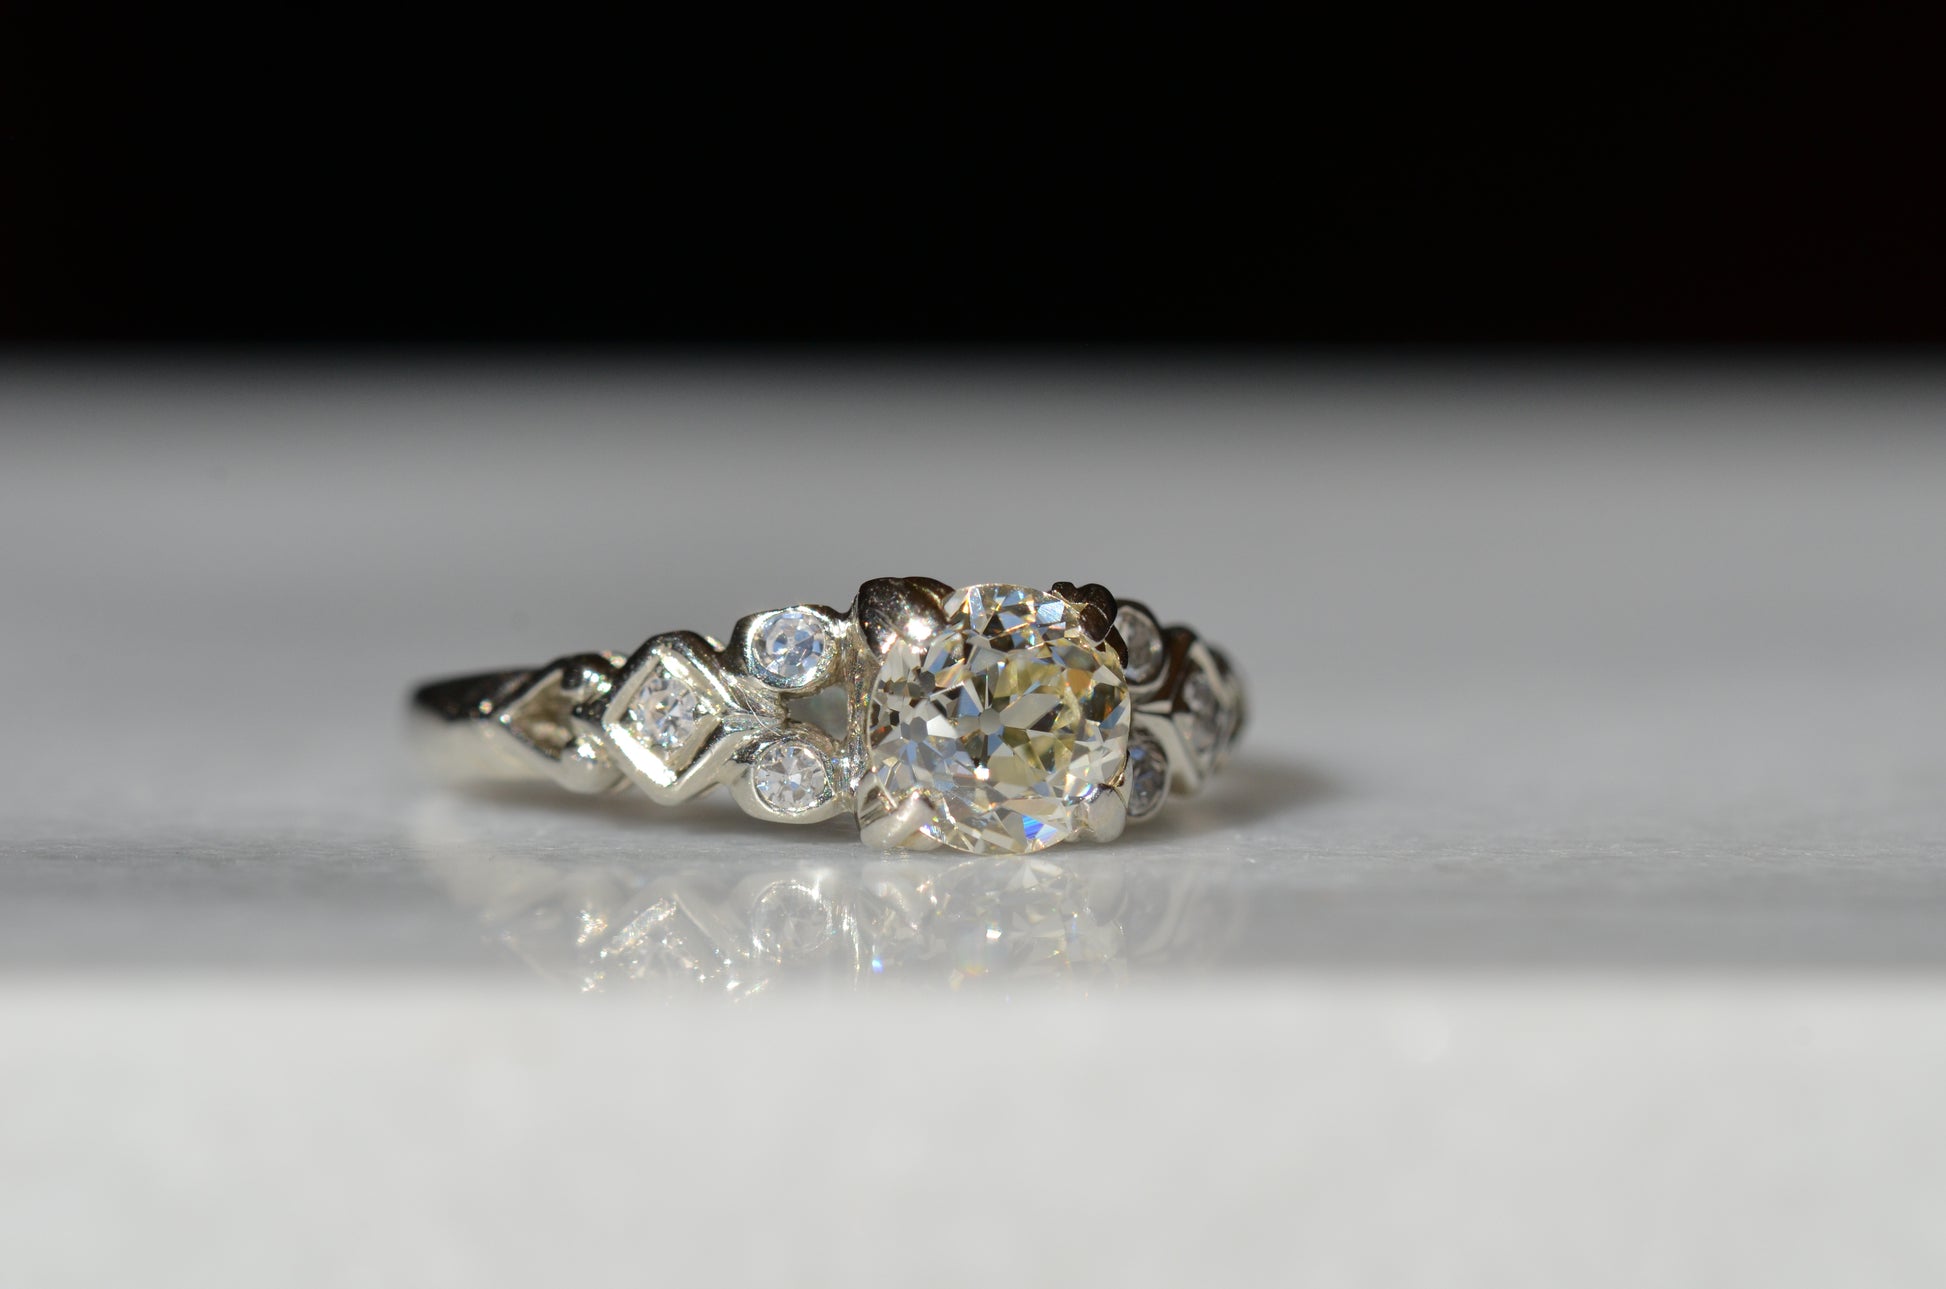 ring is tilted slightly to the right to showcase the clarity and depth of the antique old European cut diamond central to the piece. The left shoulder detail is also in focus.